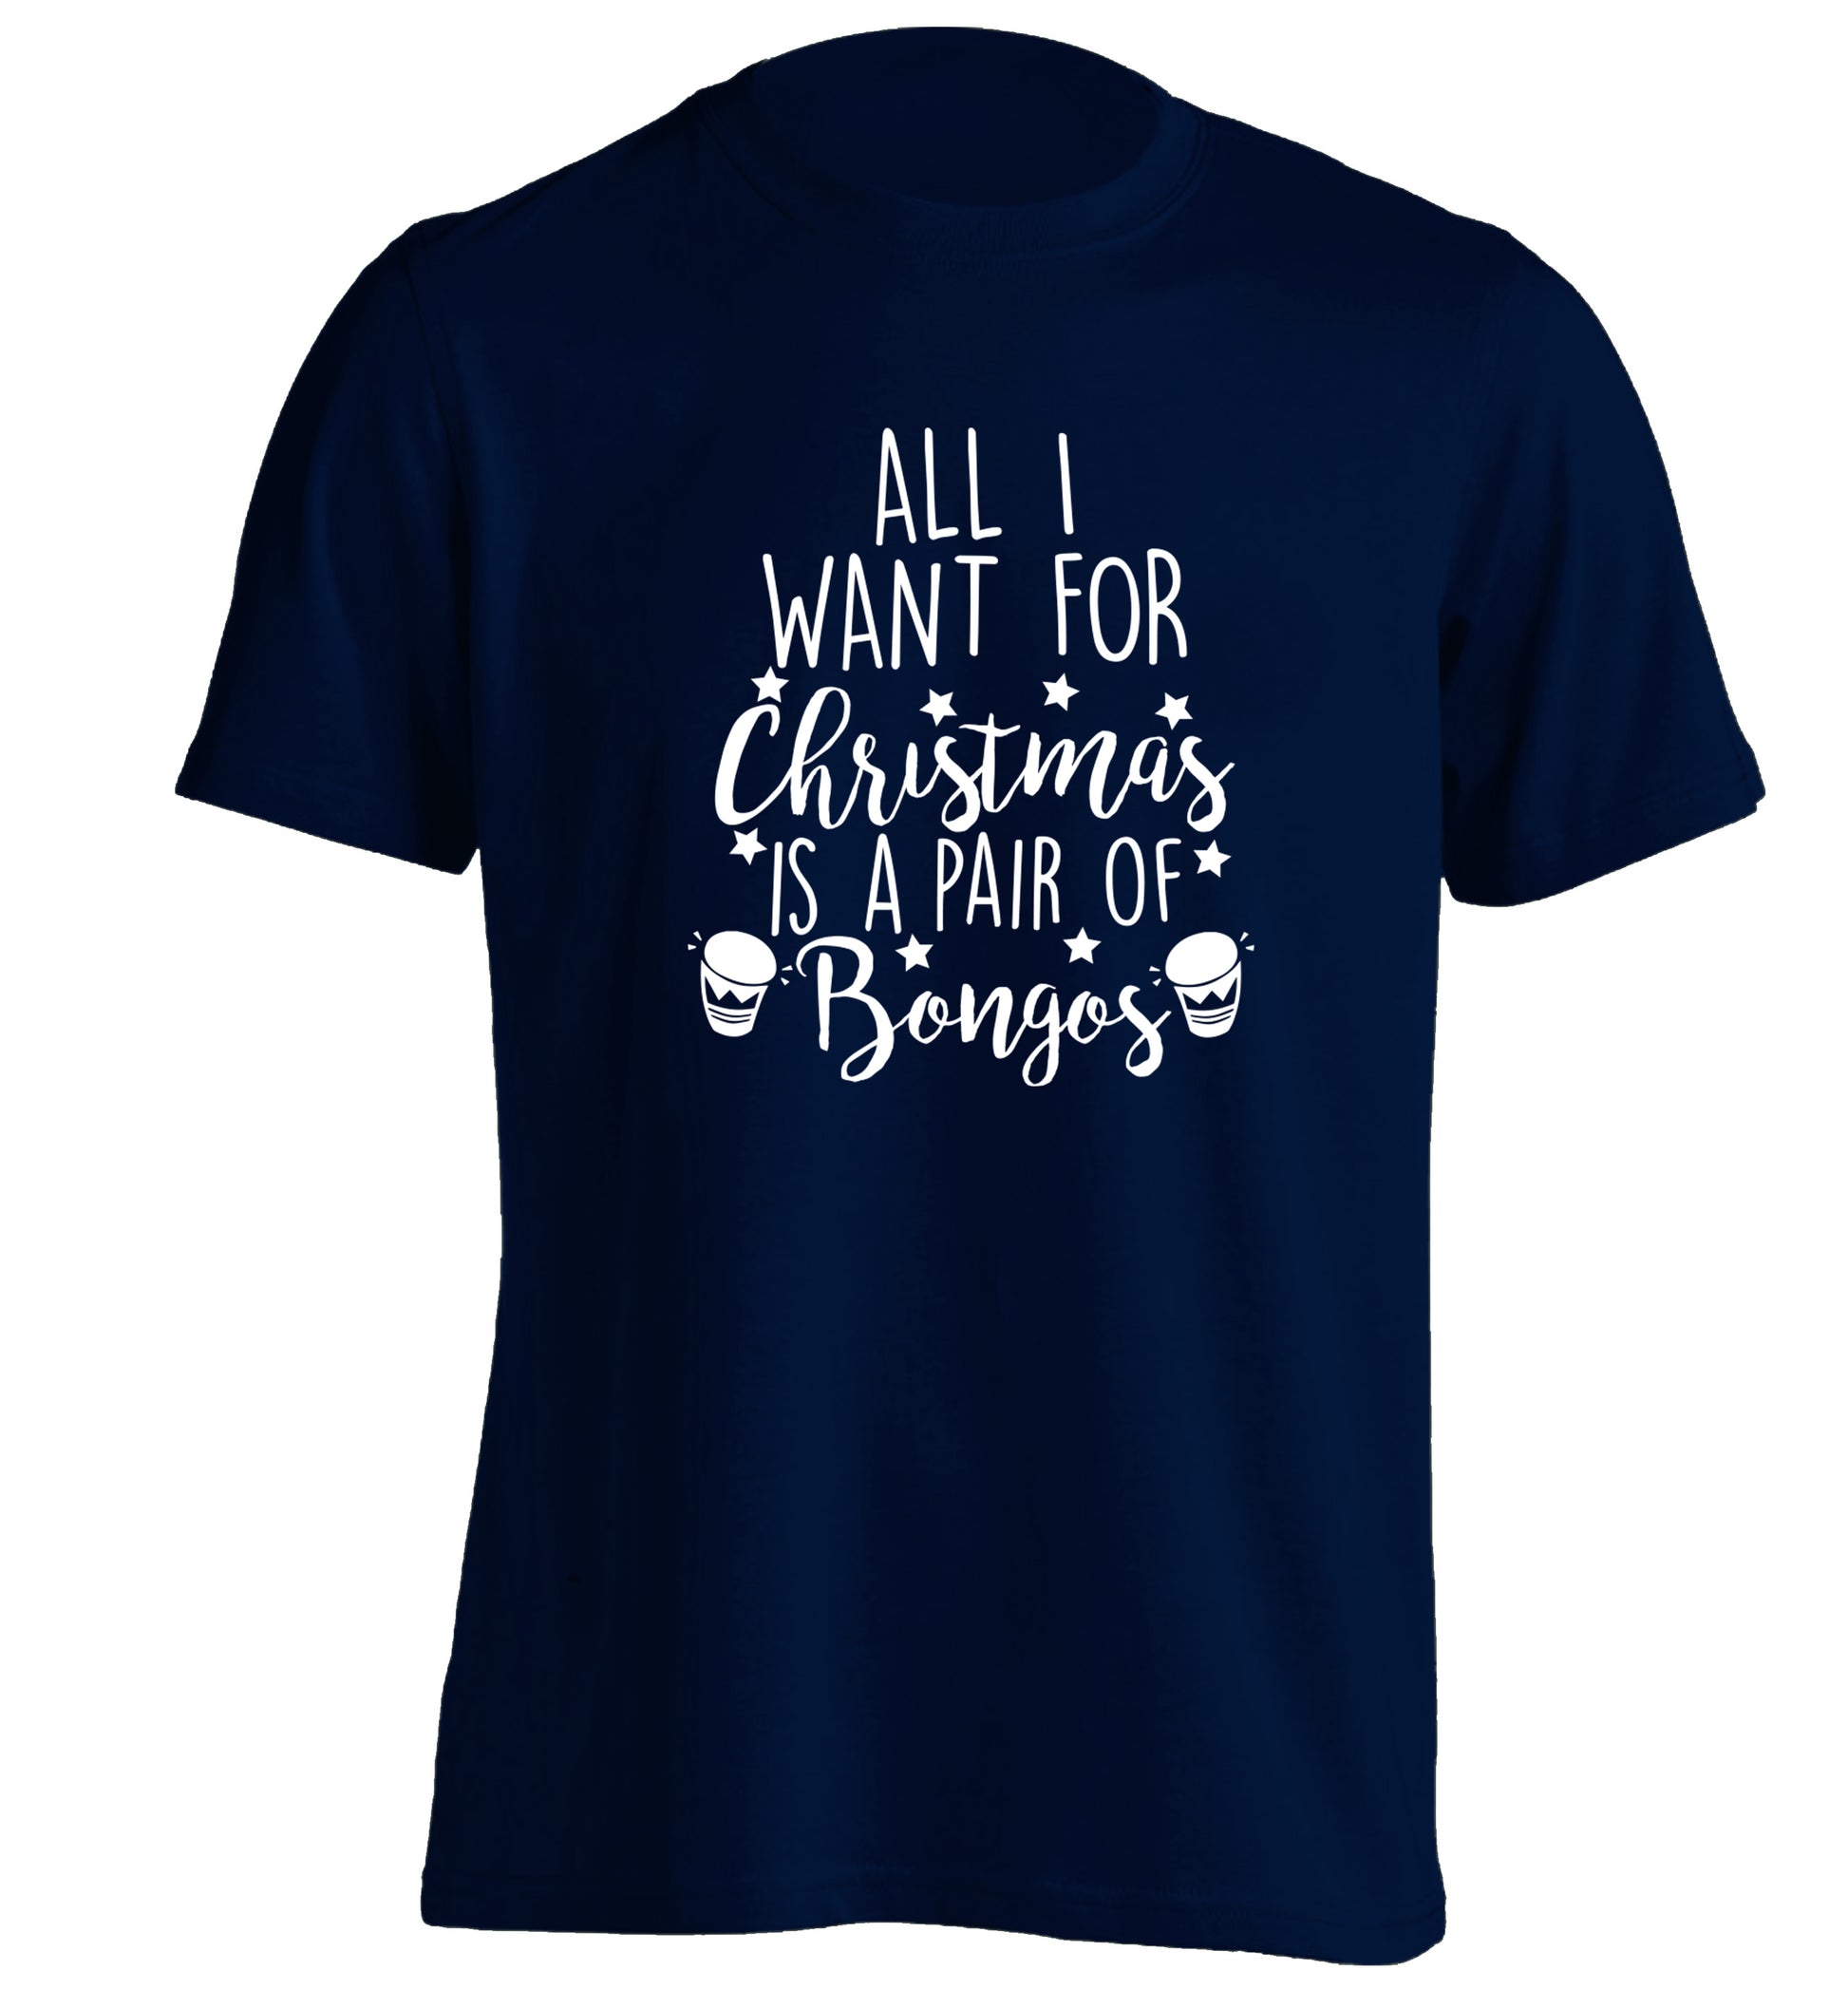 All I want for Christmas is a pair of bongos! adults unisex navy Tshirt 2XL